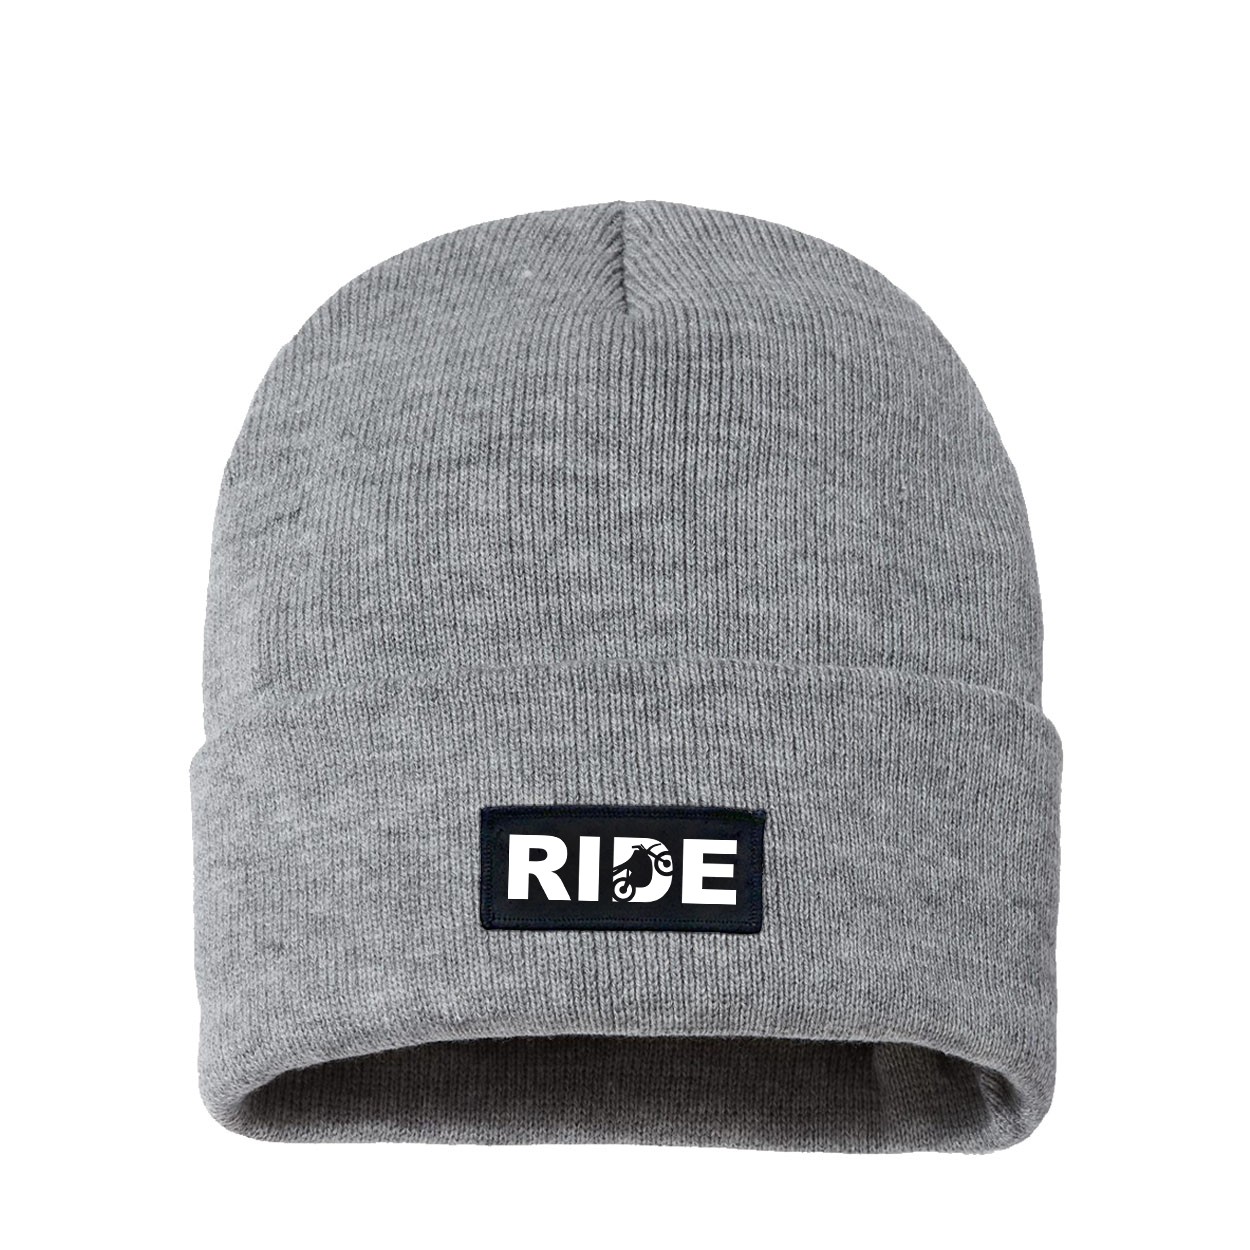 Ride Moto Logo Night Out Woven Patch Night Out Sherpa Lined Cuffed Beanie Heather Gray (White Logo)